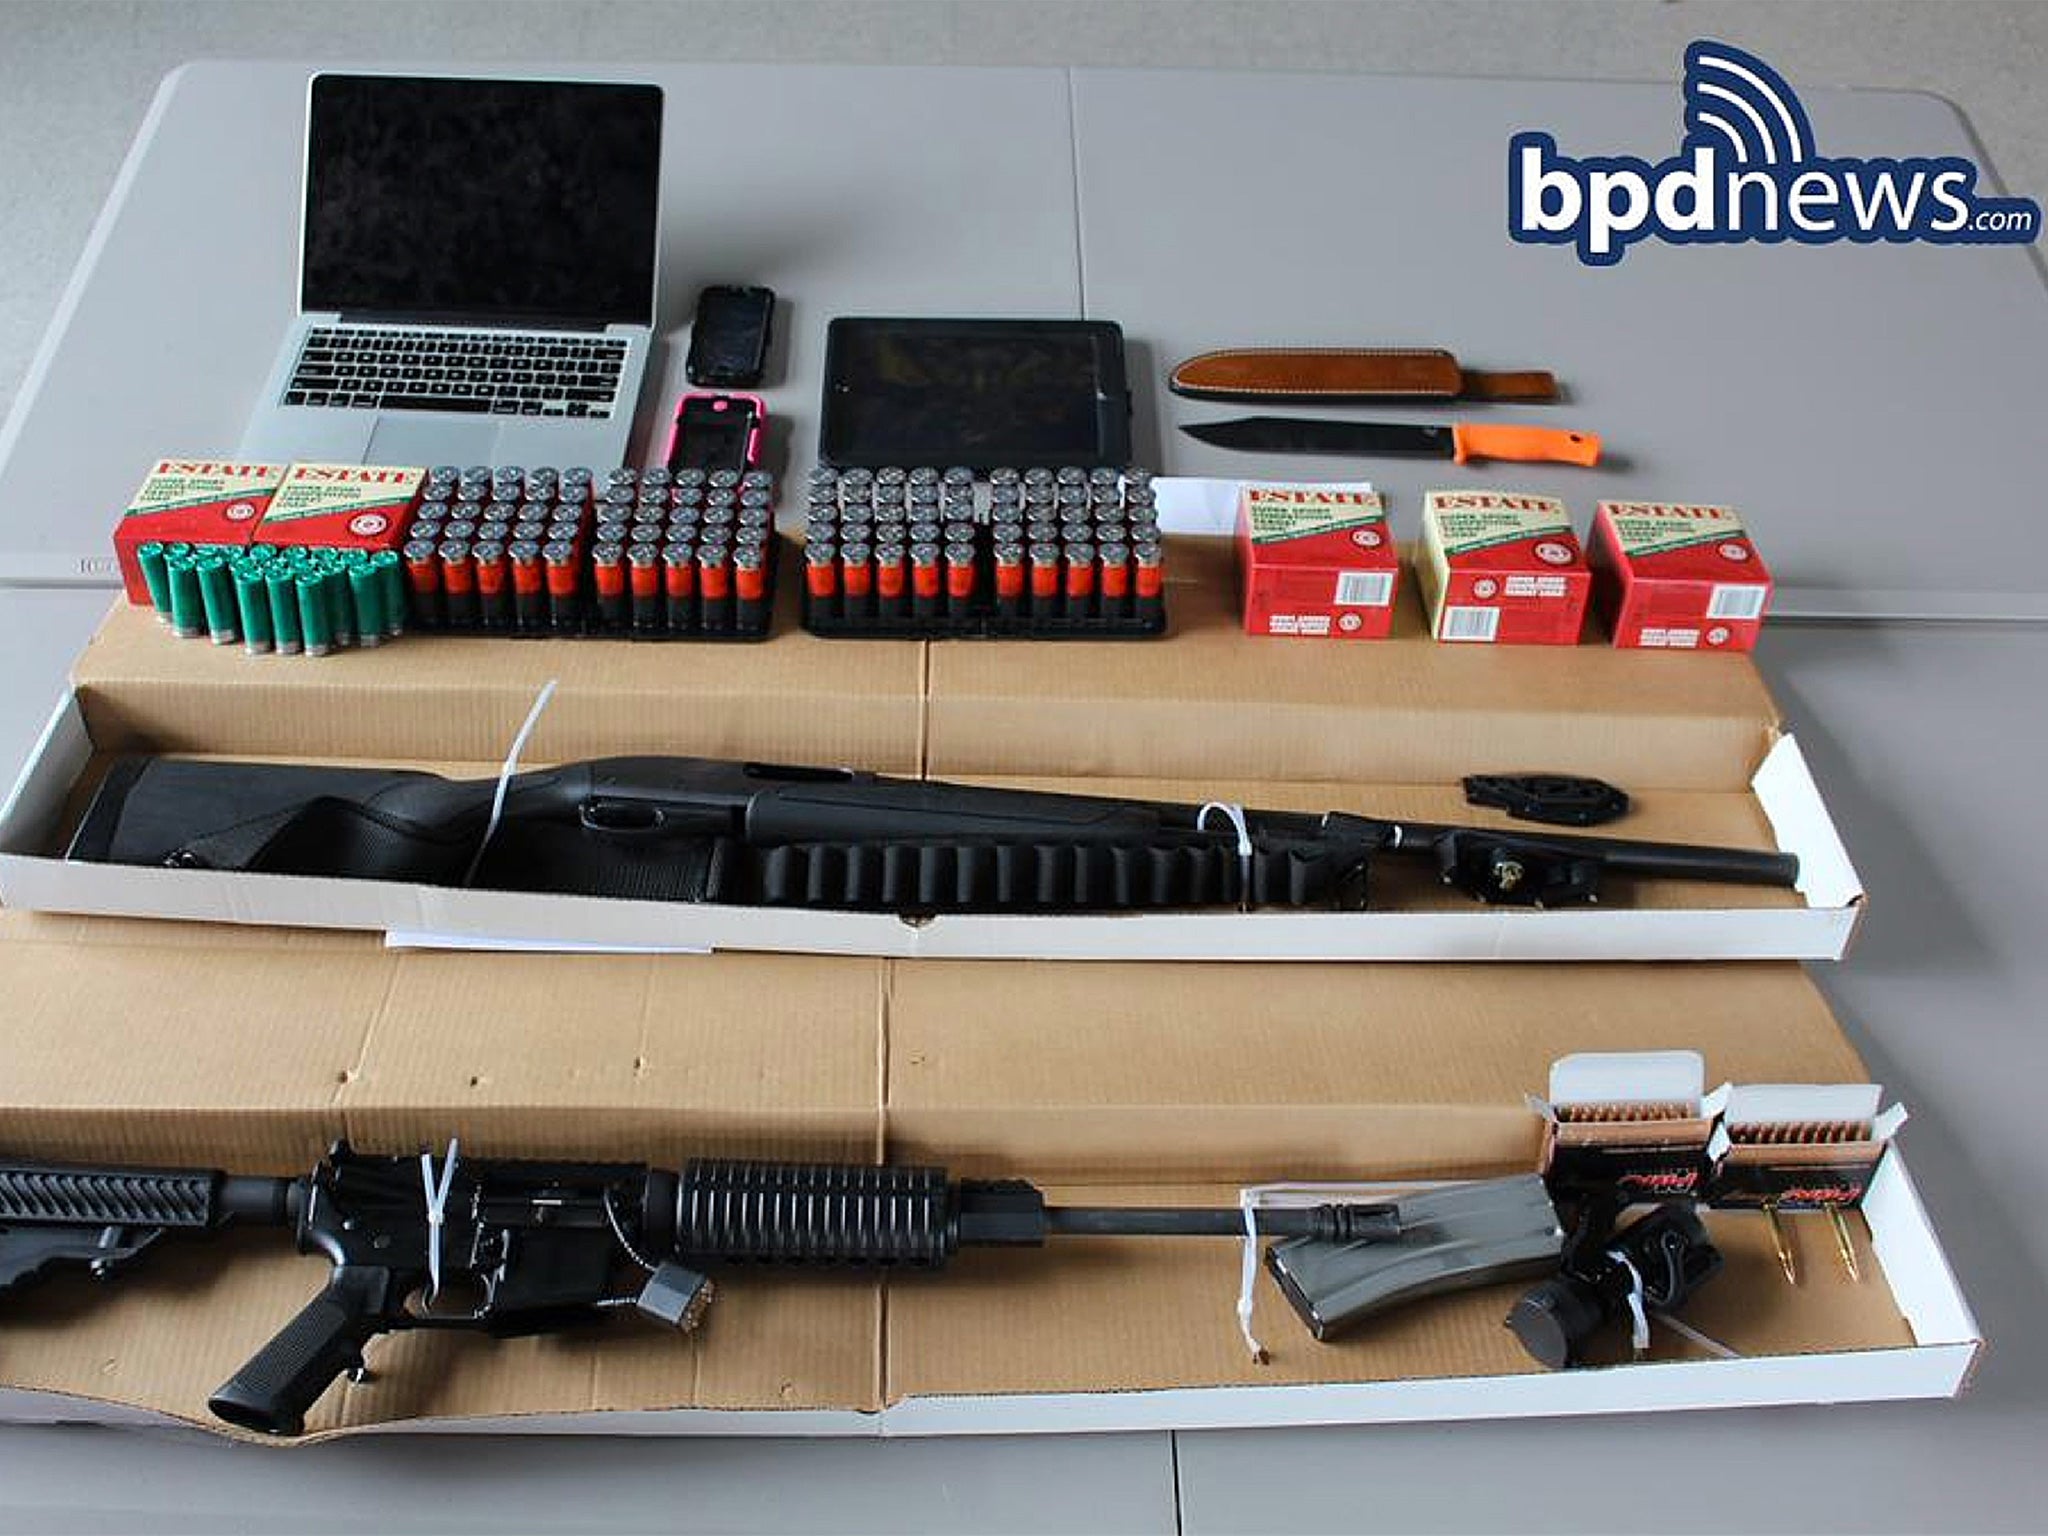 Weapons and ammunition seized by police from a vehicle after two men threatened on social media to kill attendees of the Pokemon World Championship